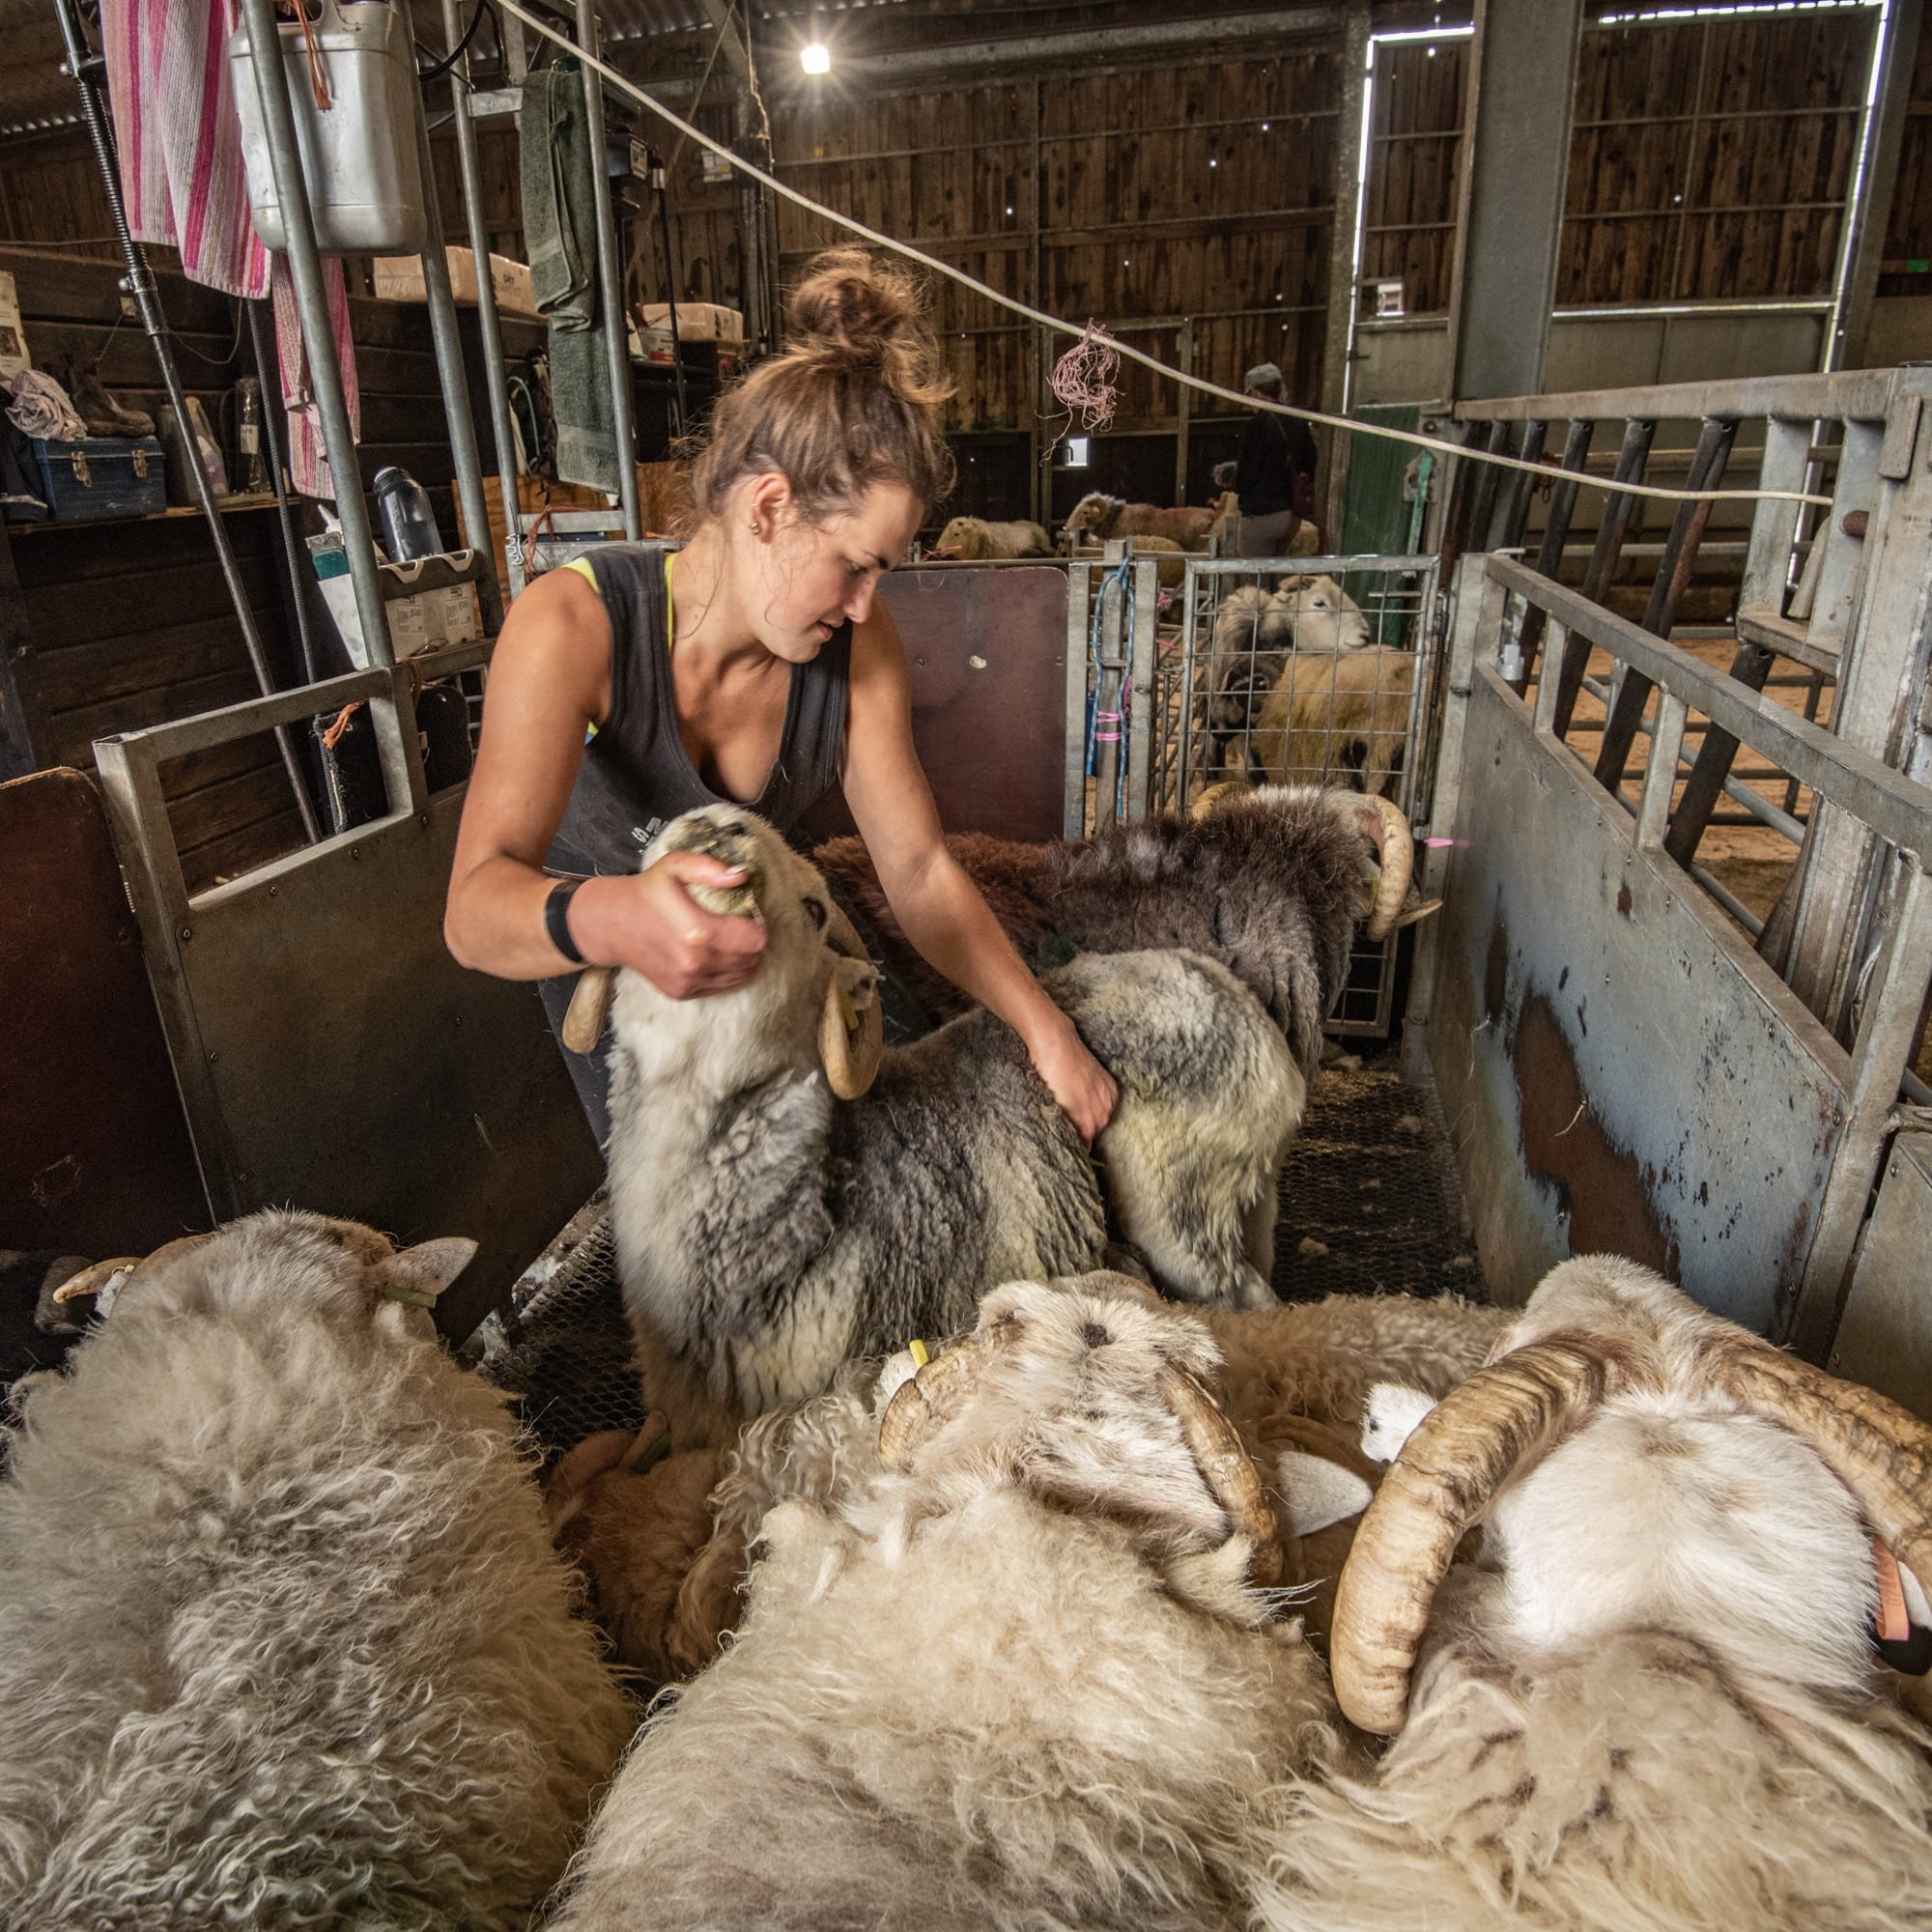 Imogen Ogborne taking a ram out of a group ready to shear it at East Okement Farm June 2022